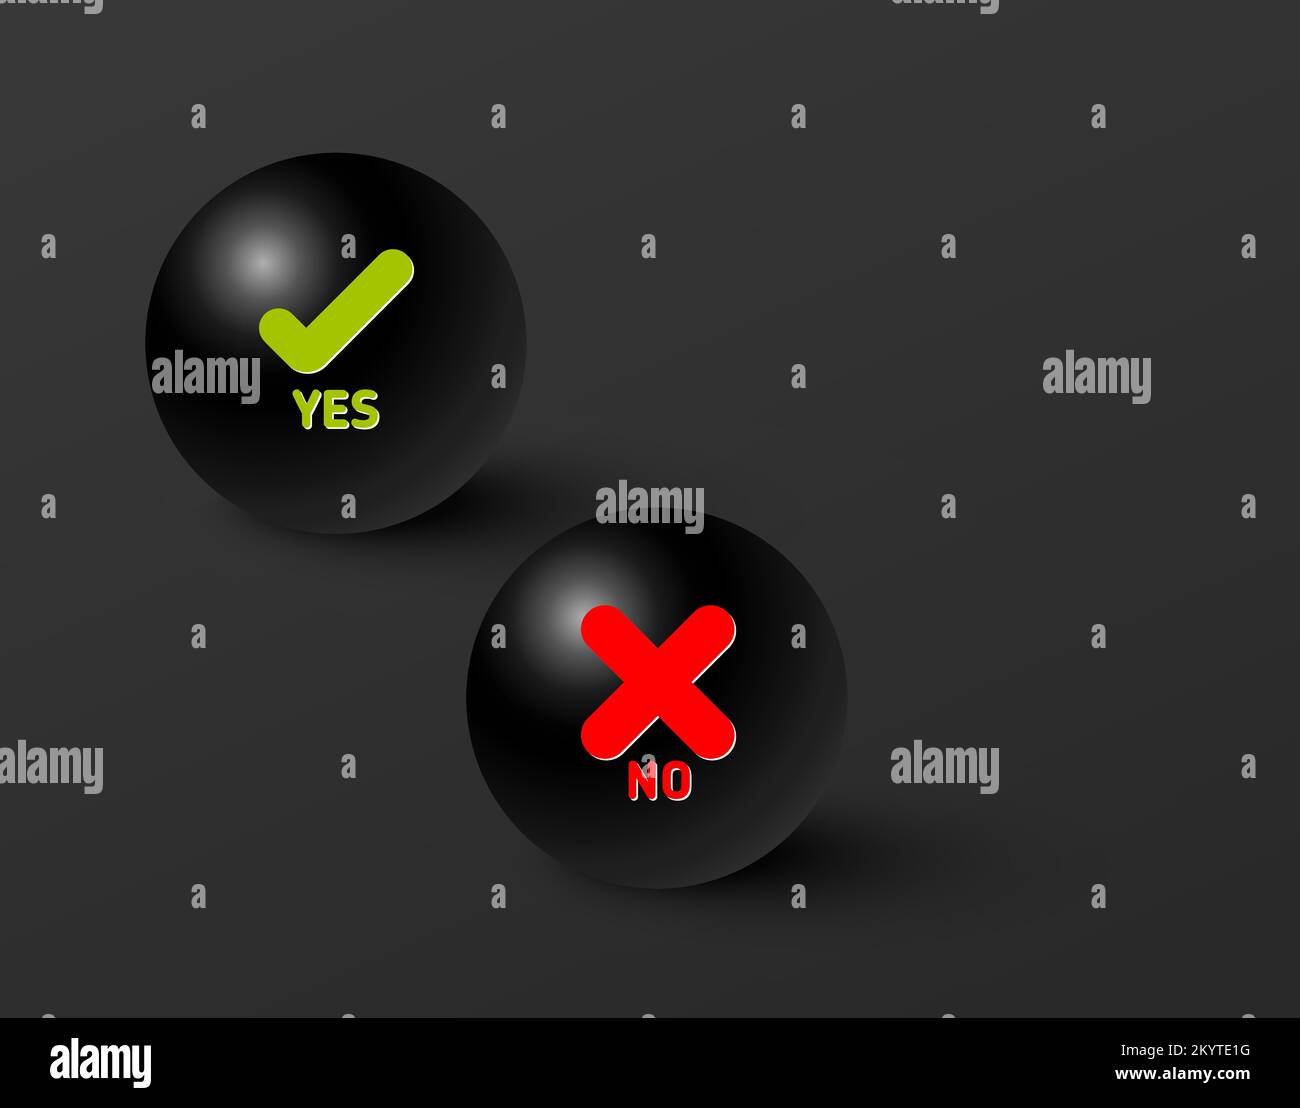 Set of fresh minimalist icons for various status - yes, no, accept, cancel in black ball spheres on dark gray gradient background - green and red colo Stock Vector